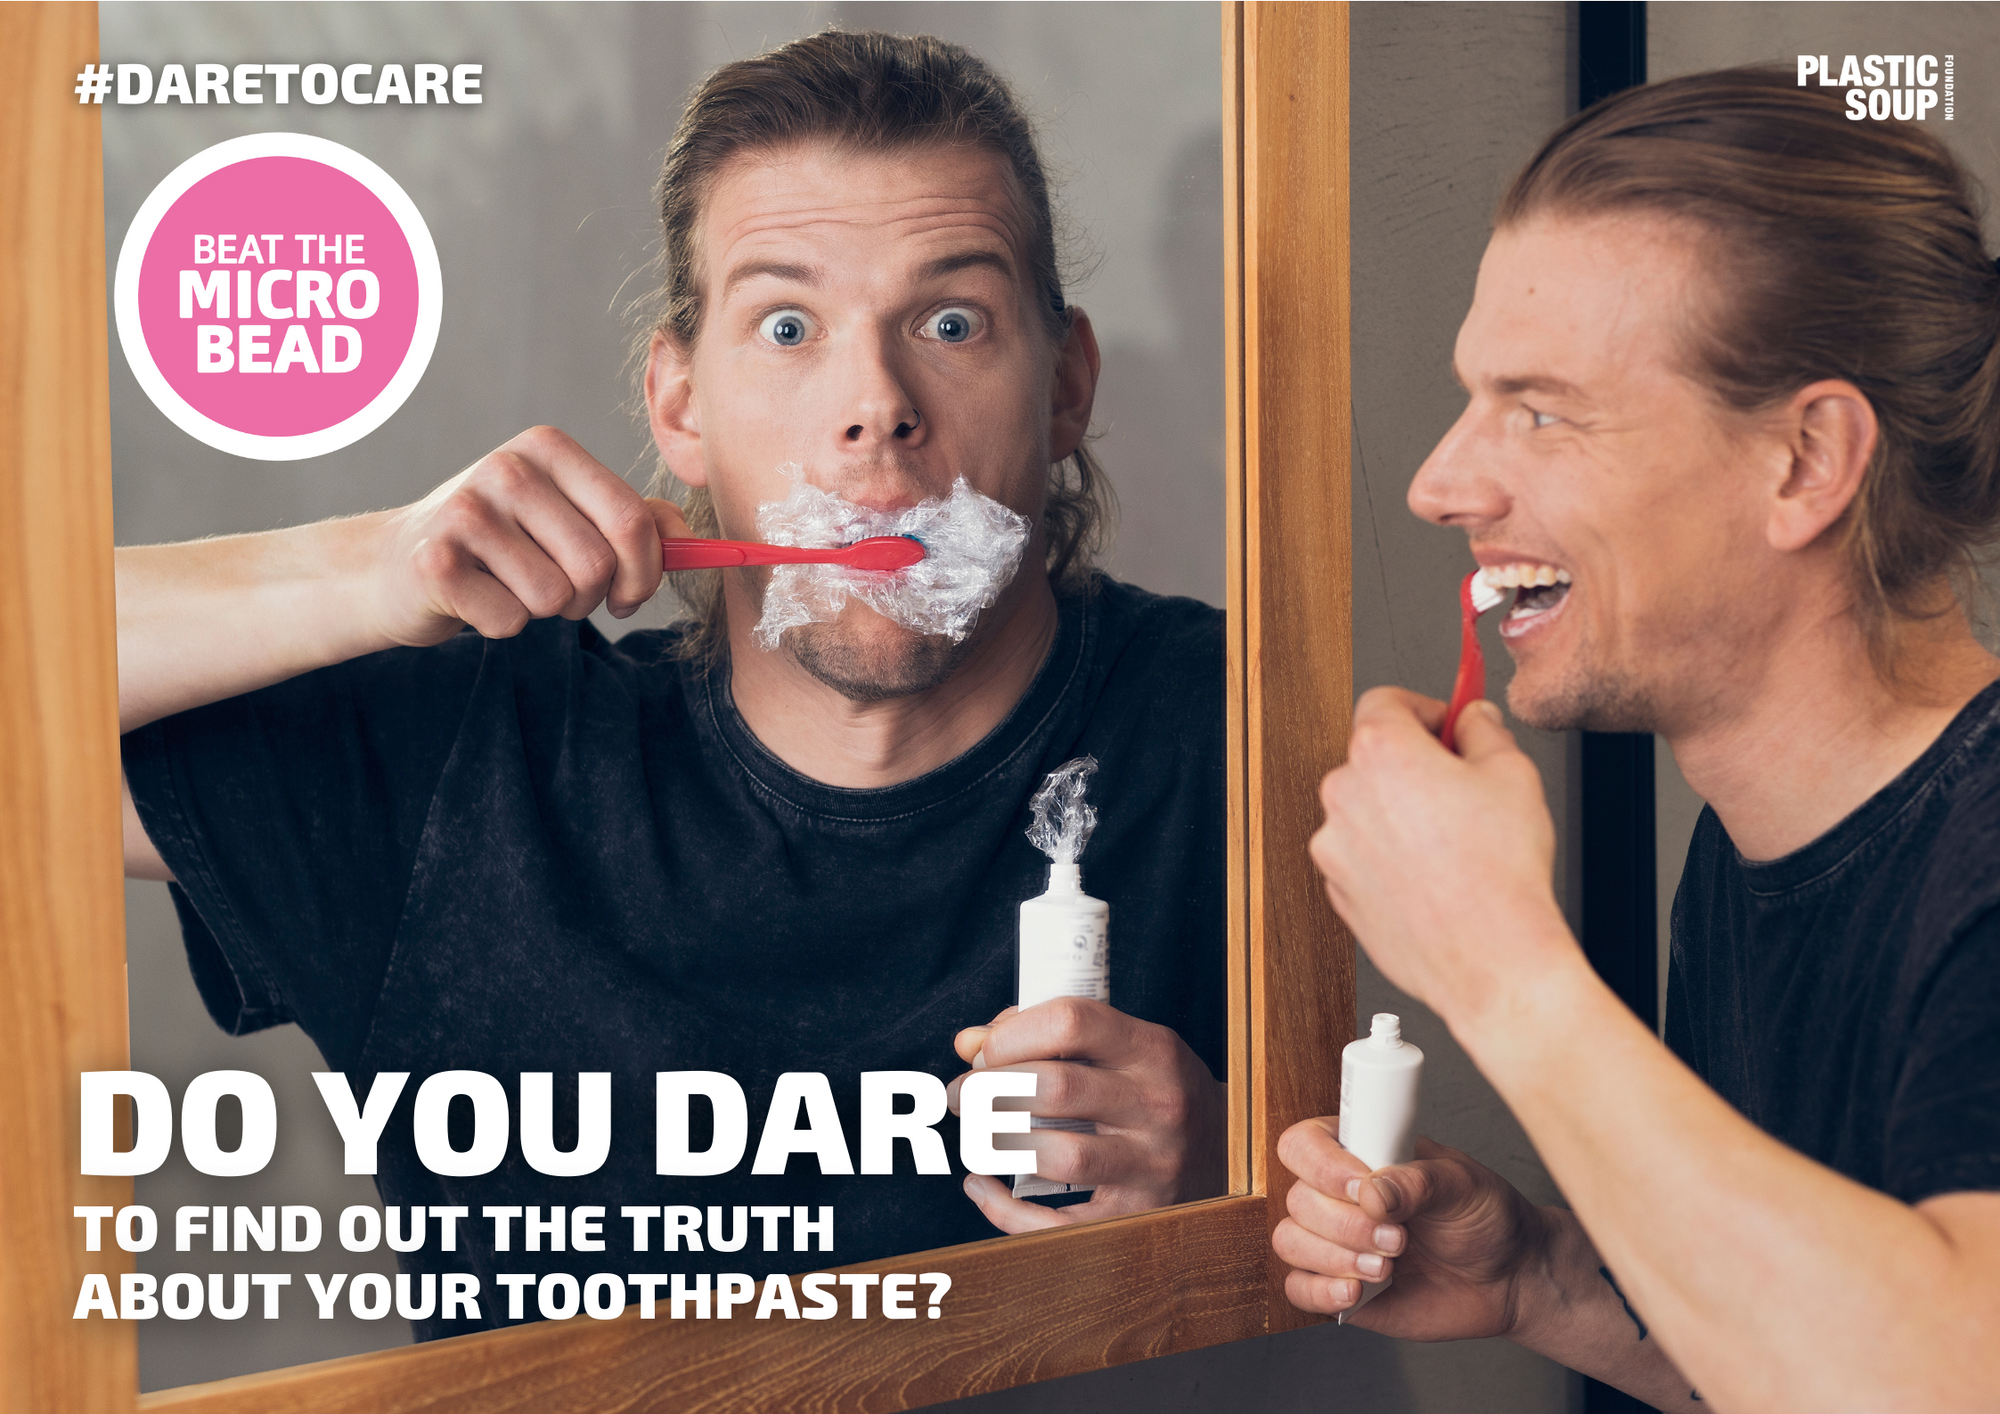 NEW STUDY: MICROPLASTICS IN 87% OF ALL COSMETICS, INCLUDING TOOTHPASTE!